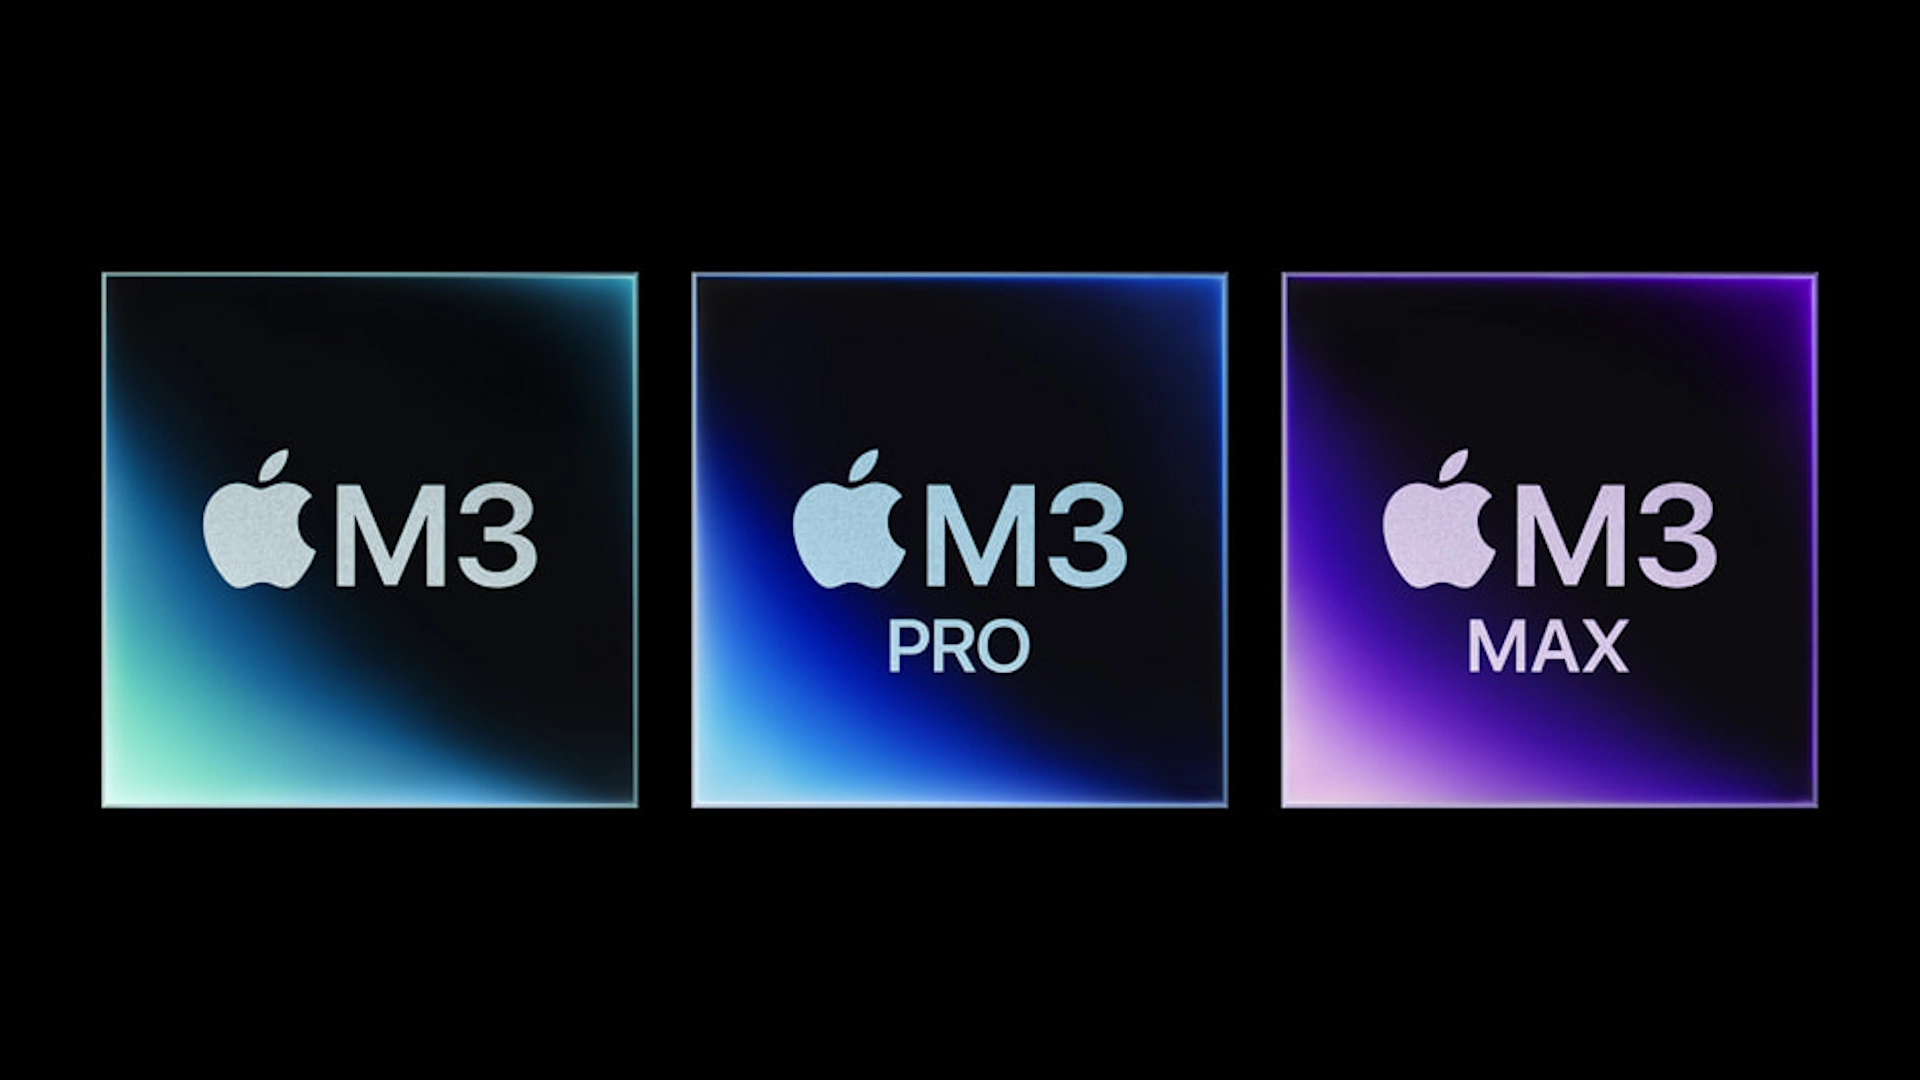 M3 chips: what does Apple actually bring to them?